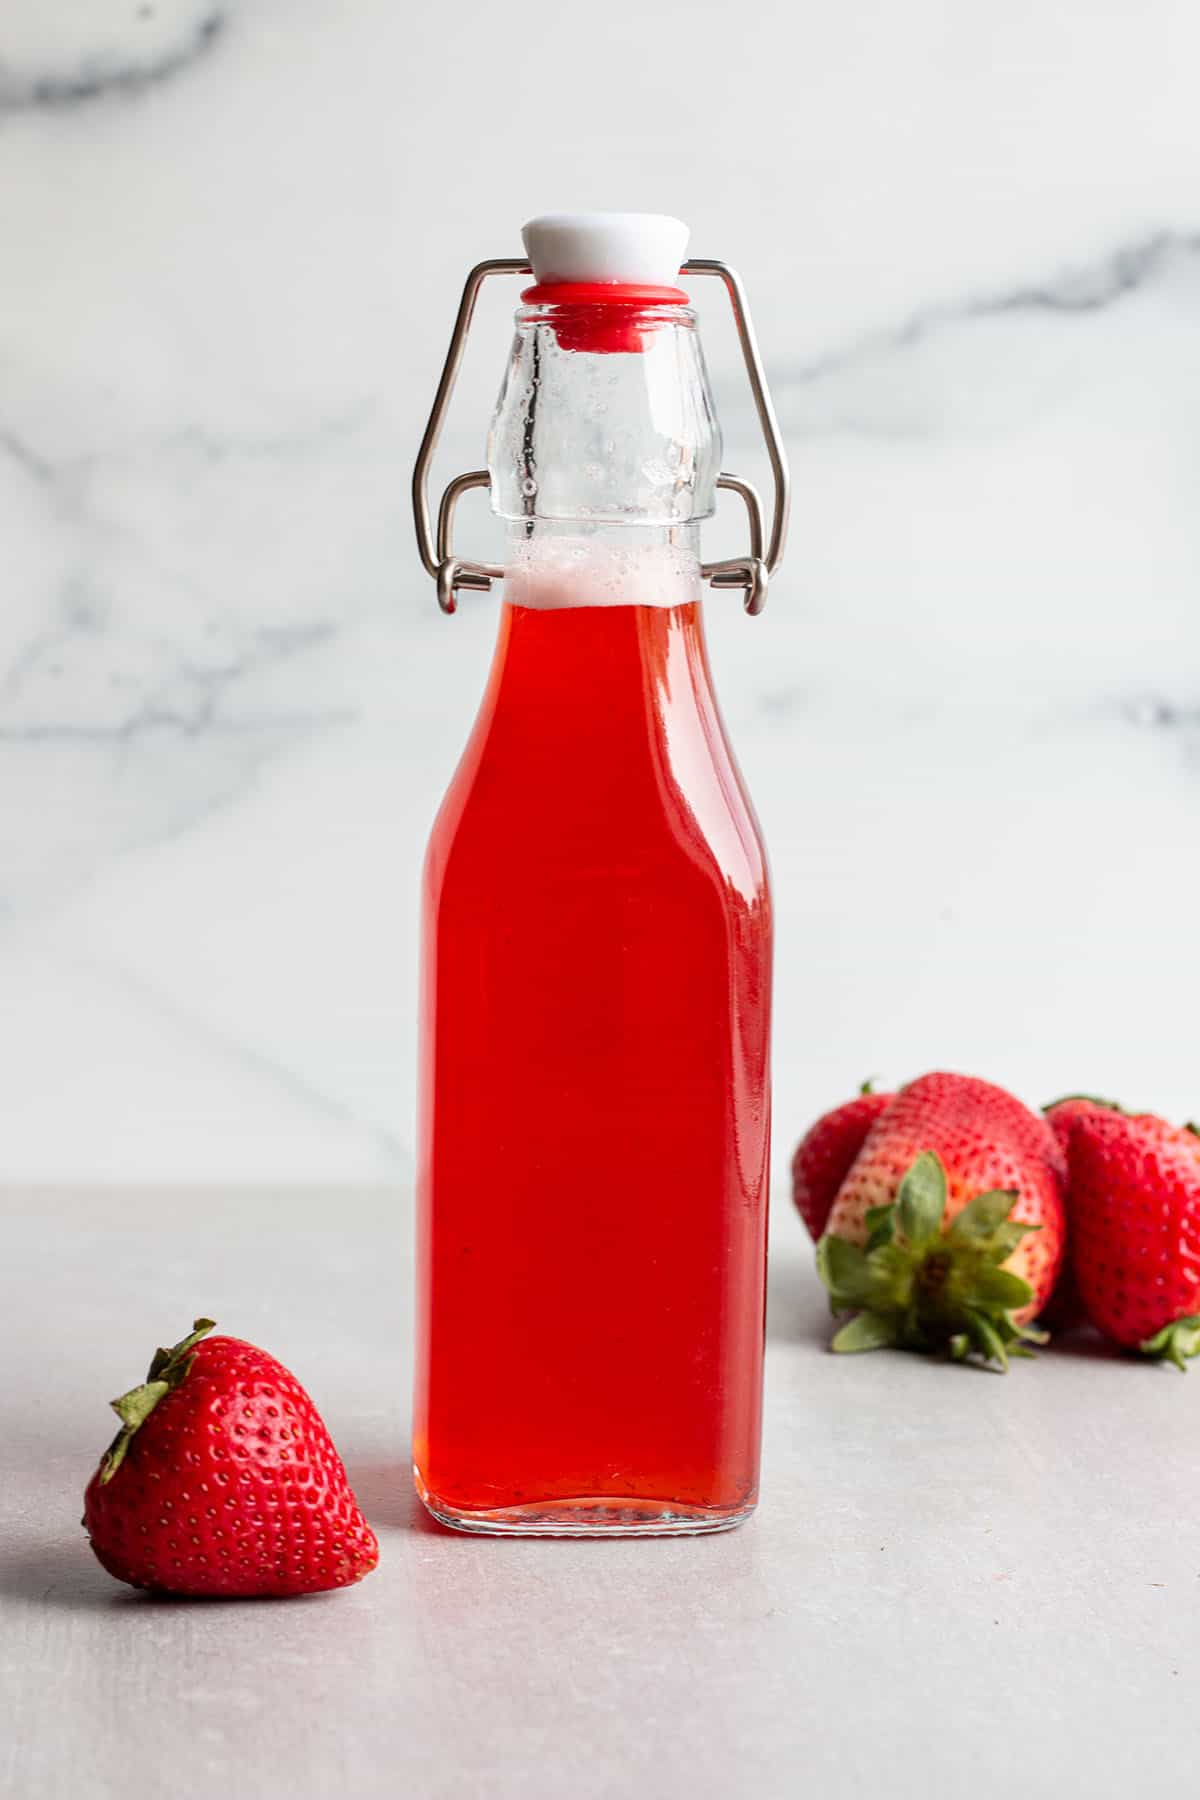 A glass flip lock bottle with a red strawberry simple syrup and fresh strawberries.